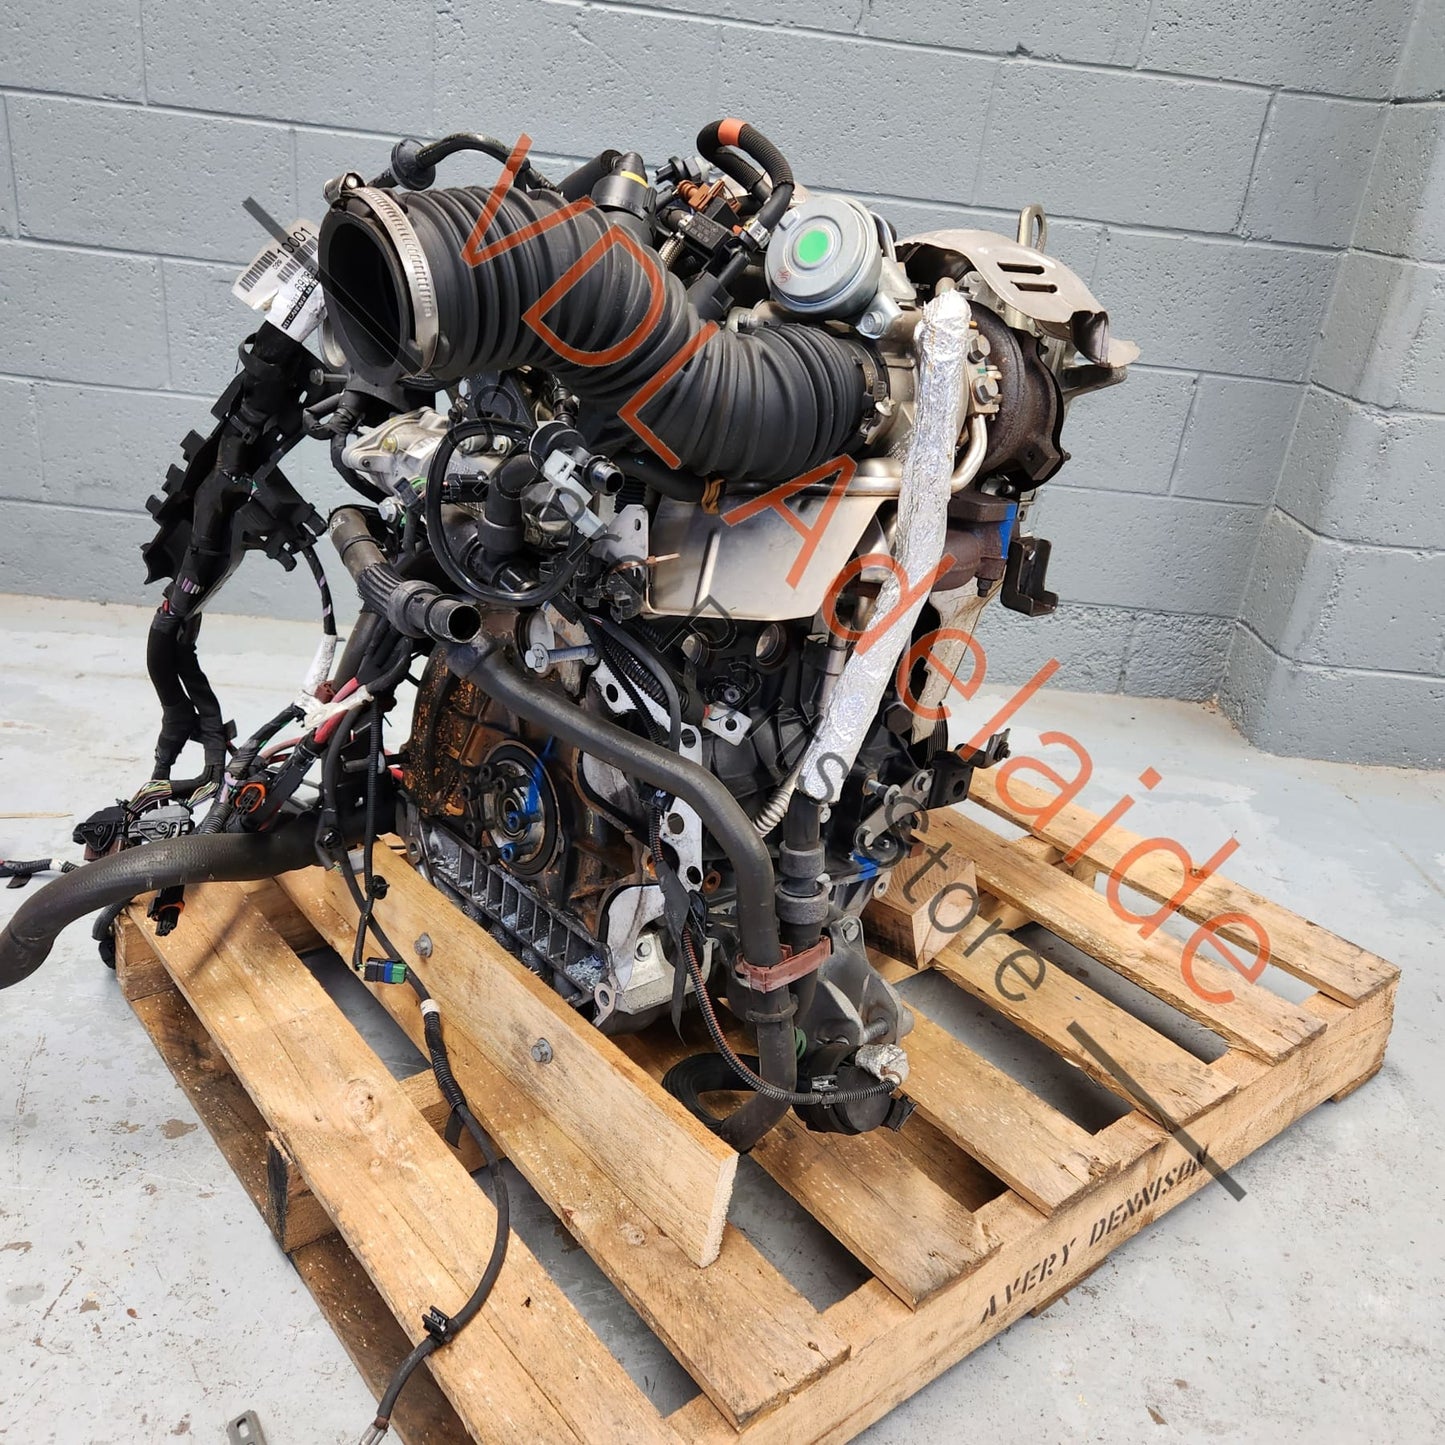 Renault Megane RS250 RS265 RS275 2.0 F4R F4RT C030259 200kw Engine 4 Cylinder Turbo Complete Whole Motor